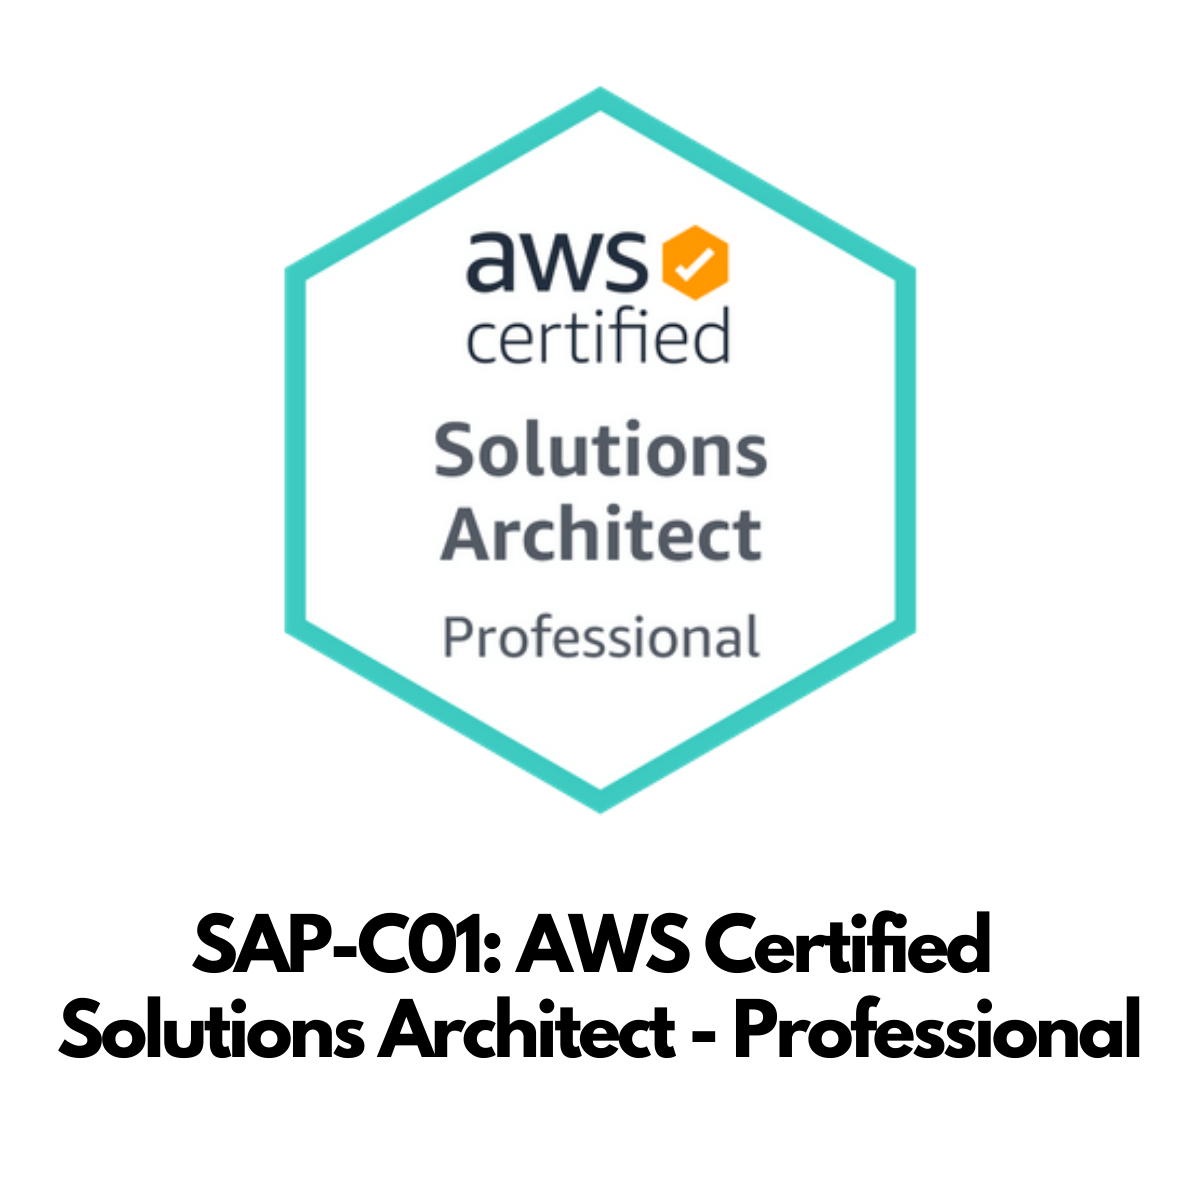 The unofficial guide to AWS Certified Solutions Architect Professional ...